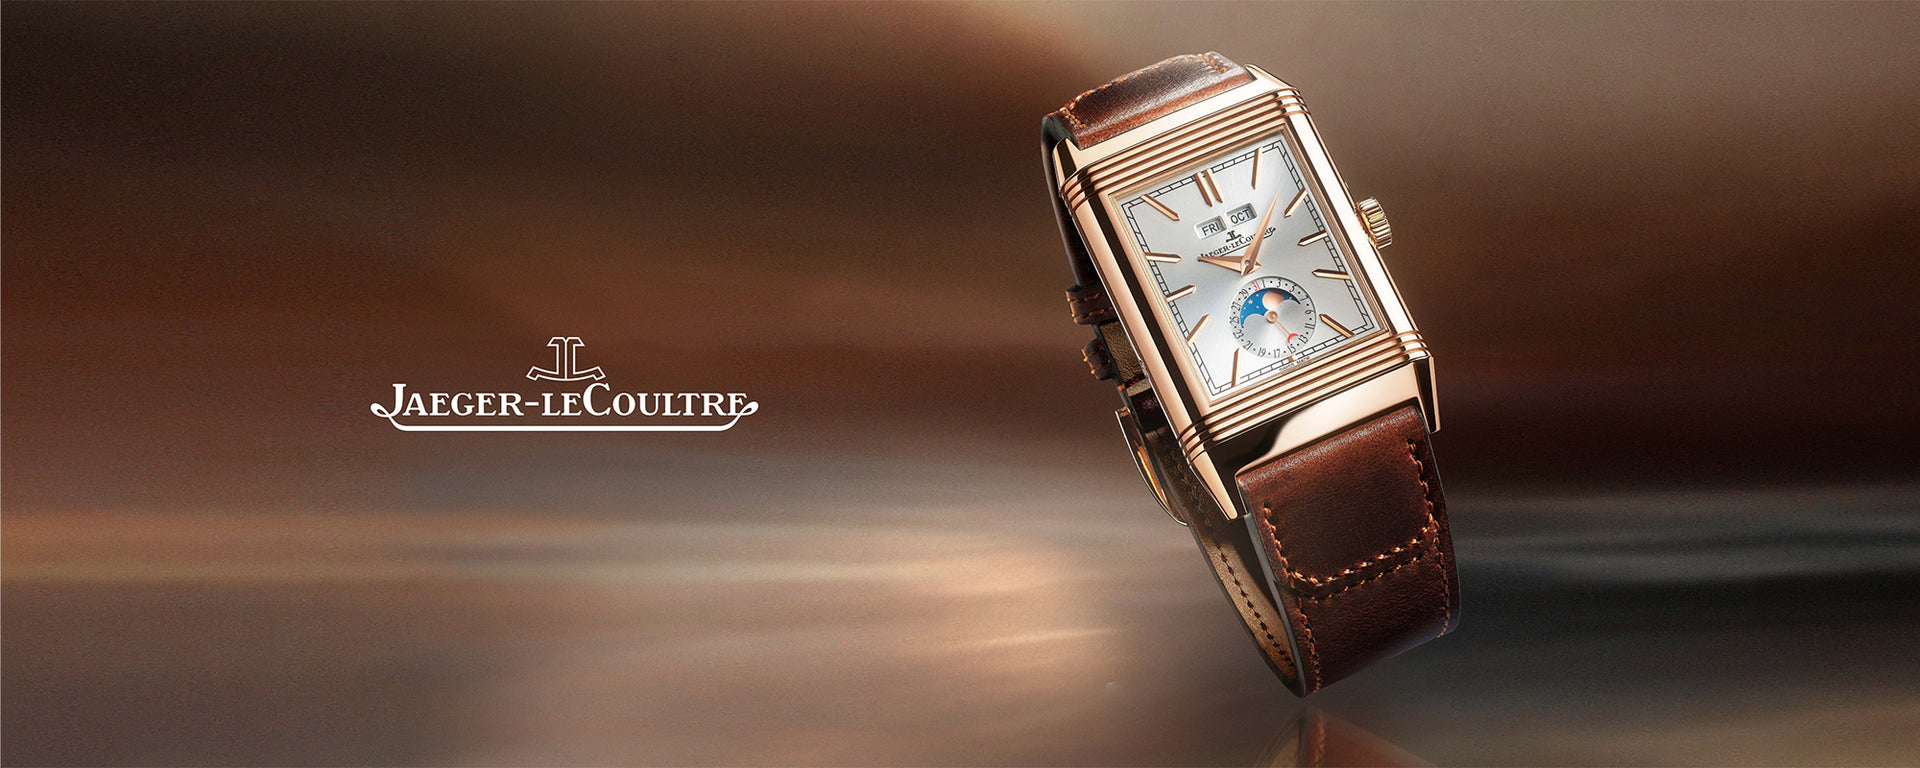 Visit Greenleaf & Crosby's Jaeger-LeCoultre Watch Boutique in Palm Beach